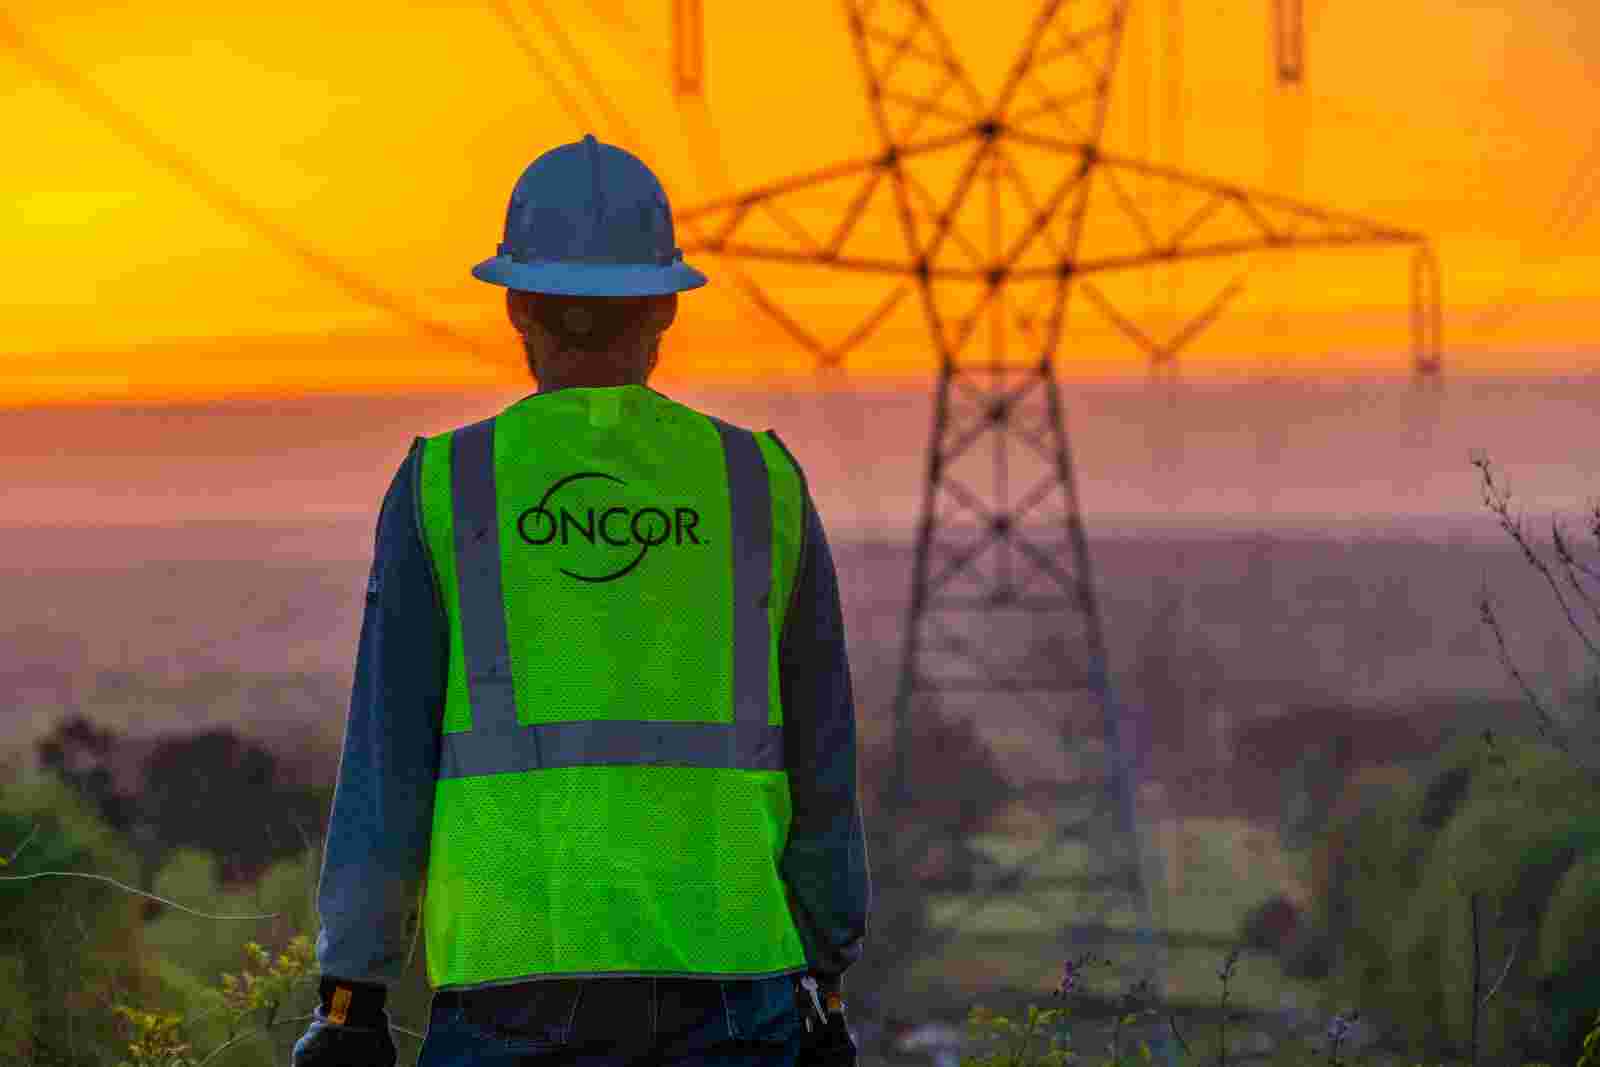 Lineman Watching Sunrise Over Power Grid - Expert Commercial Industrial Photographer